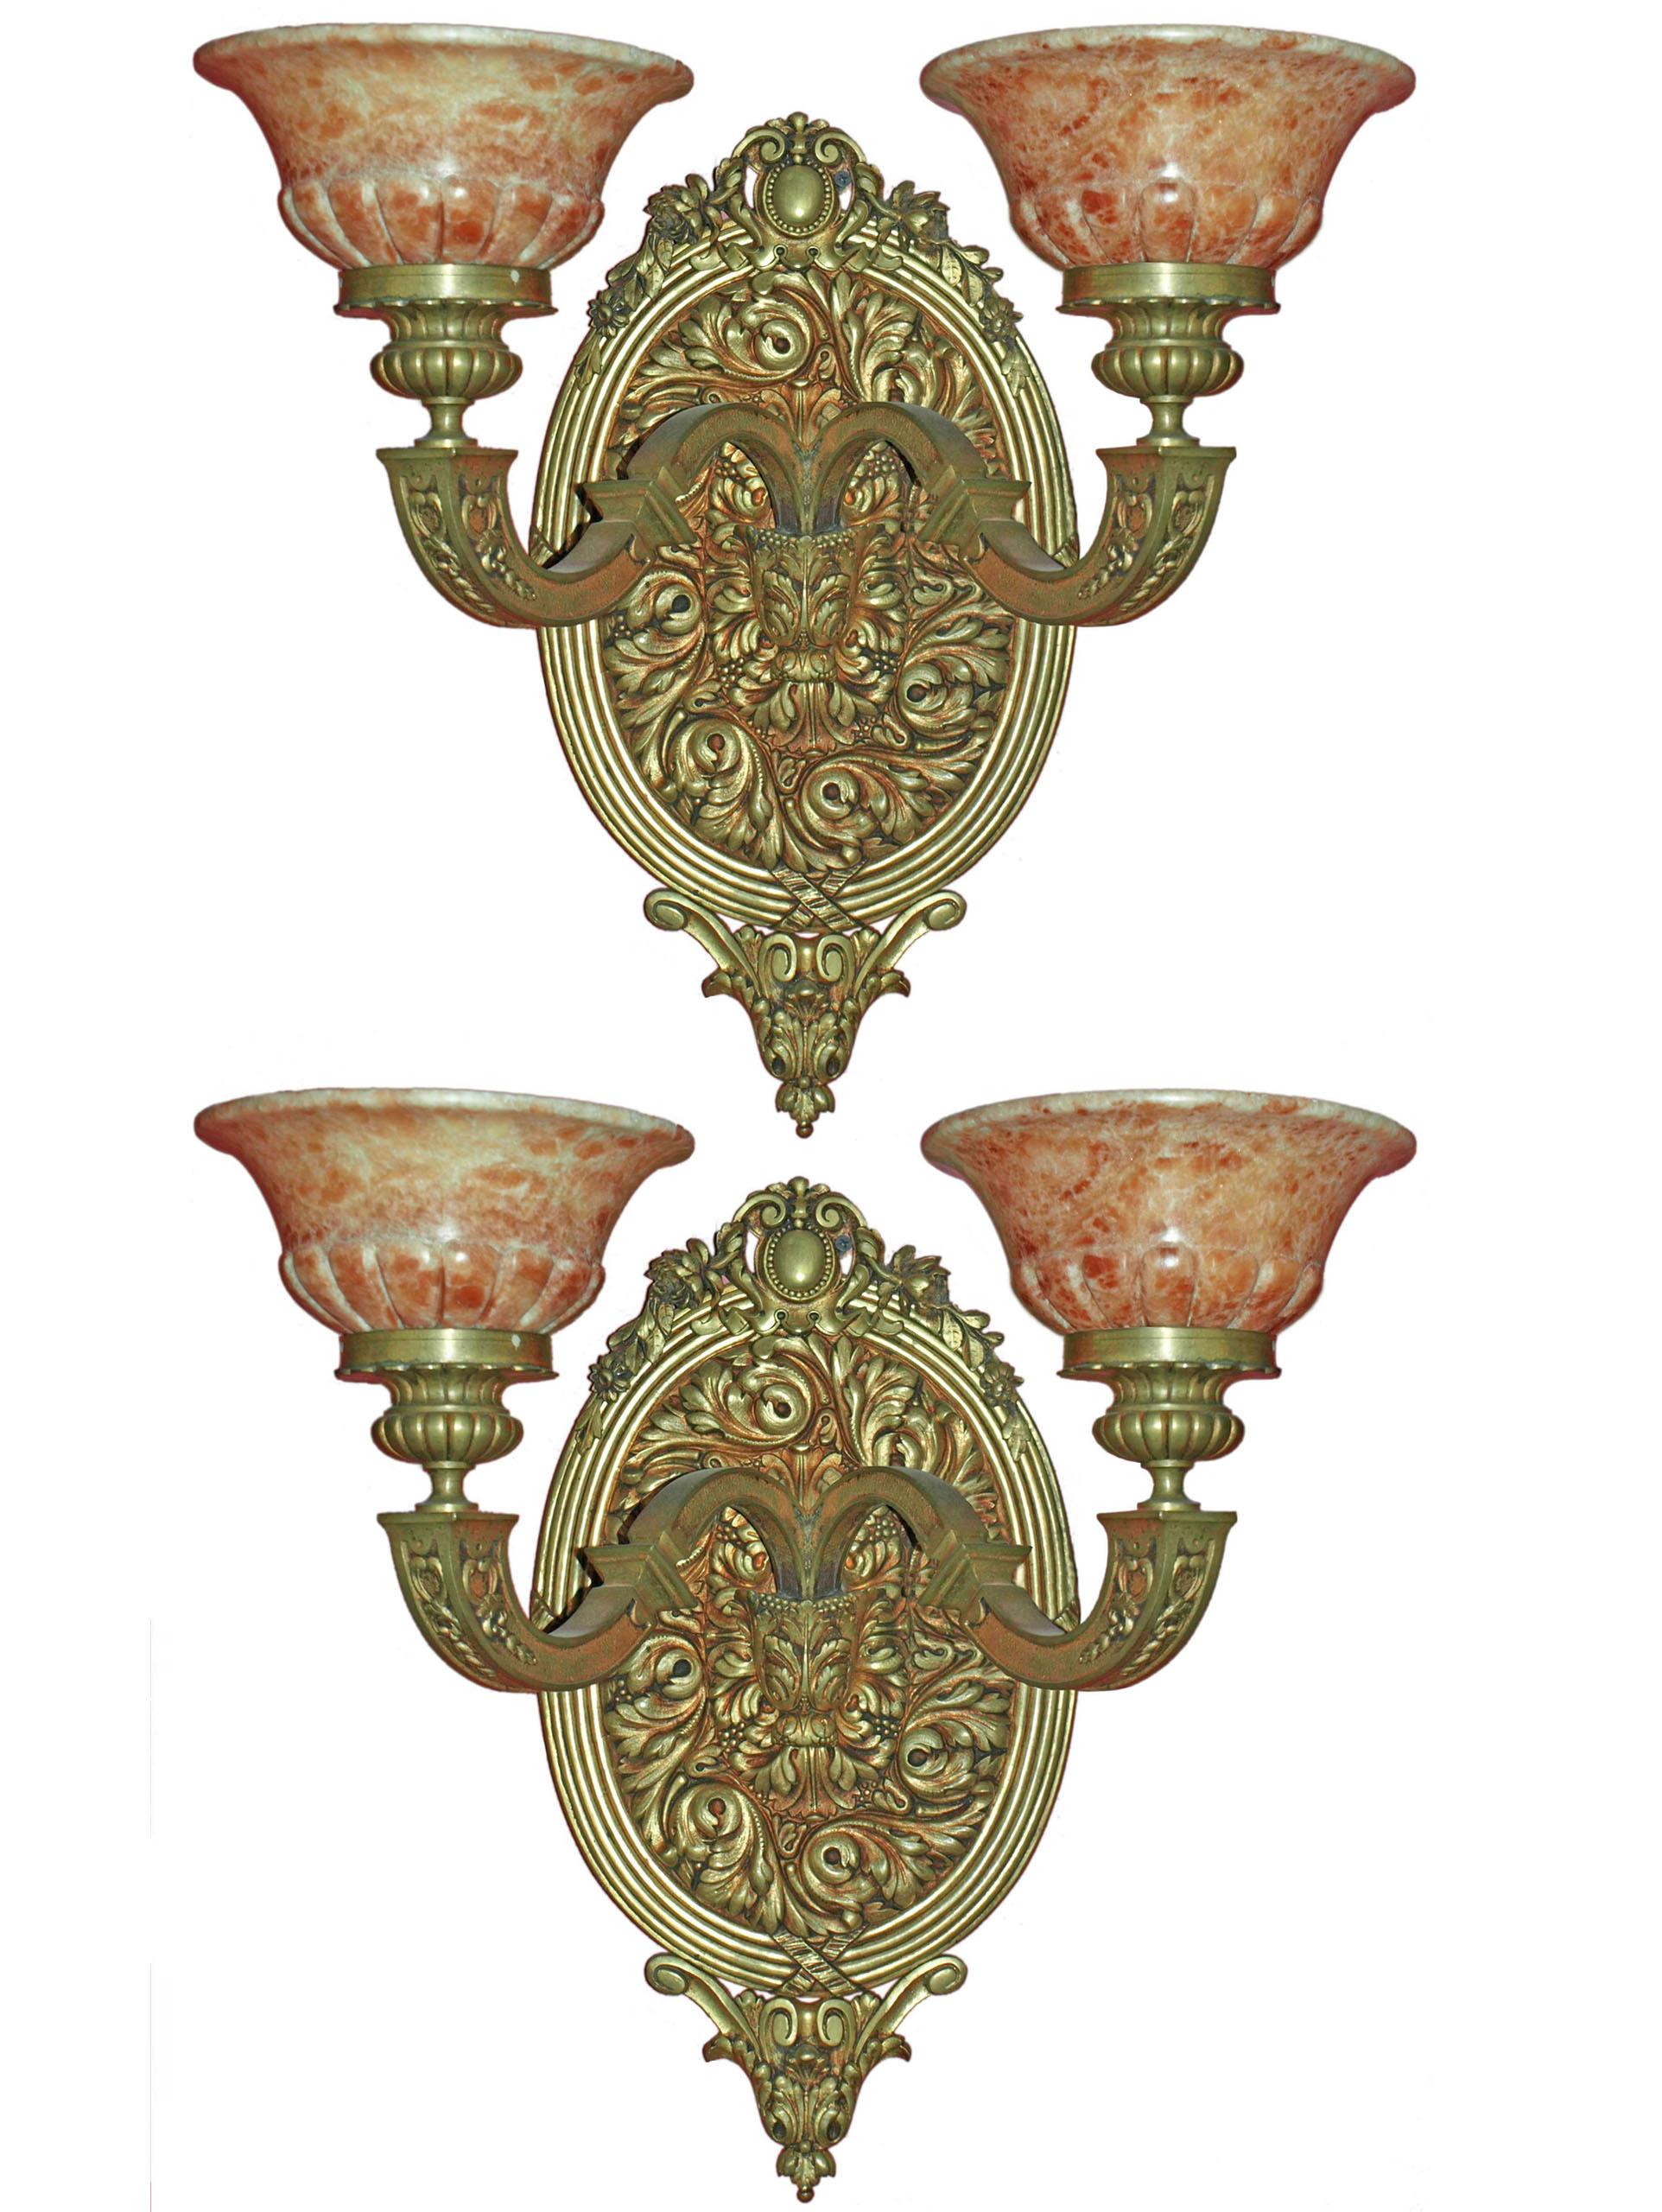 A superb pair of gilt bronze & alabaster wall sconces. France, circa 1920.
Dimensions: Height 16